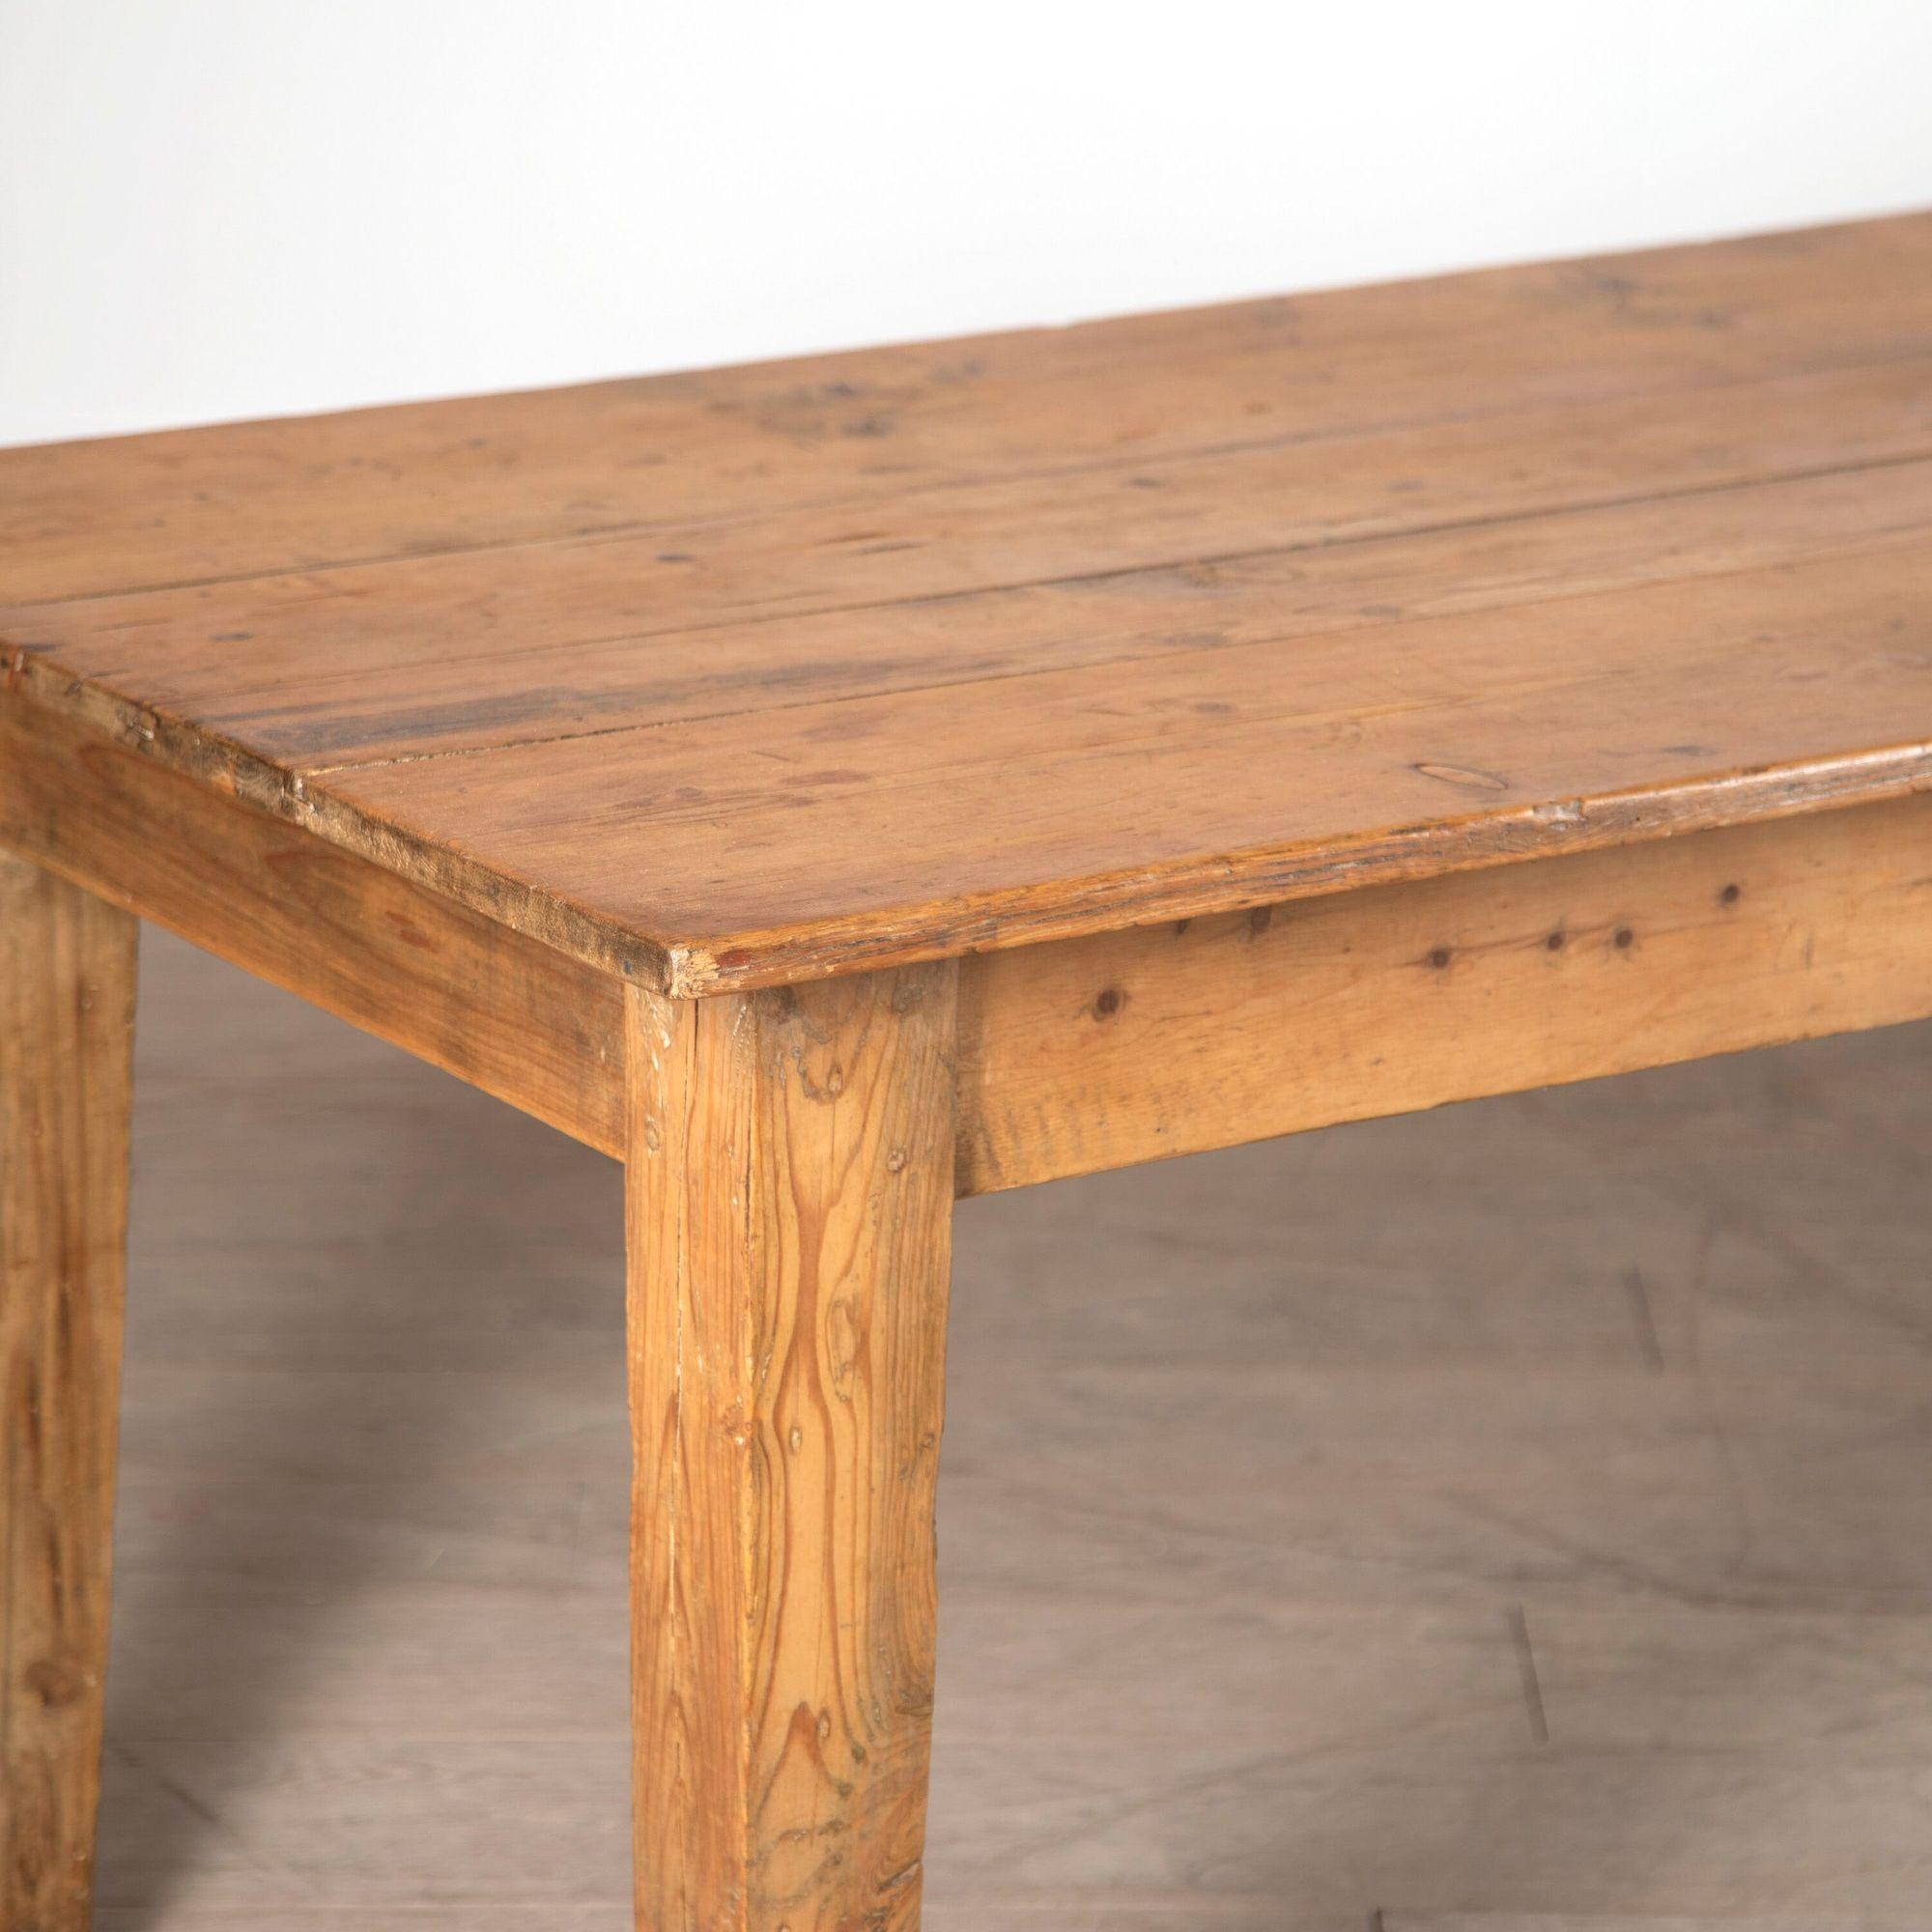 19th century English pine refectory table.
Dating from the Late 19th Century, this elegant pine dining table is of very attractive colour. 
Supported on square tapered legs.
With a simple, graceful design, this table would mix very easily with